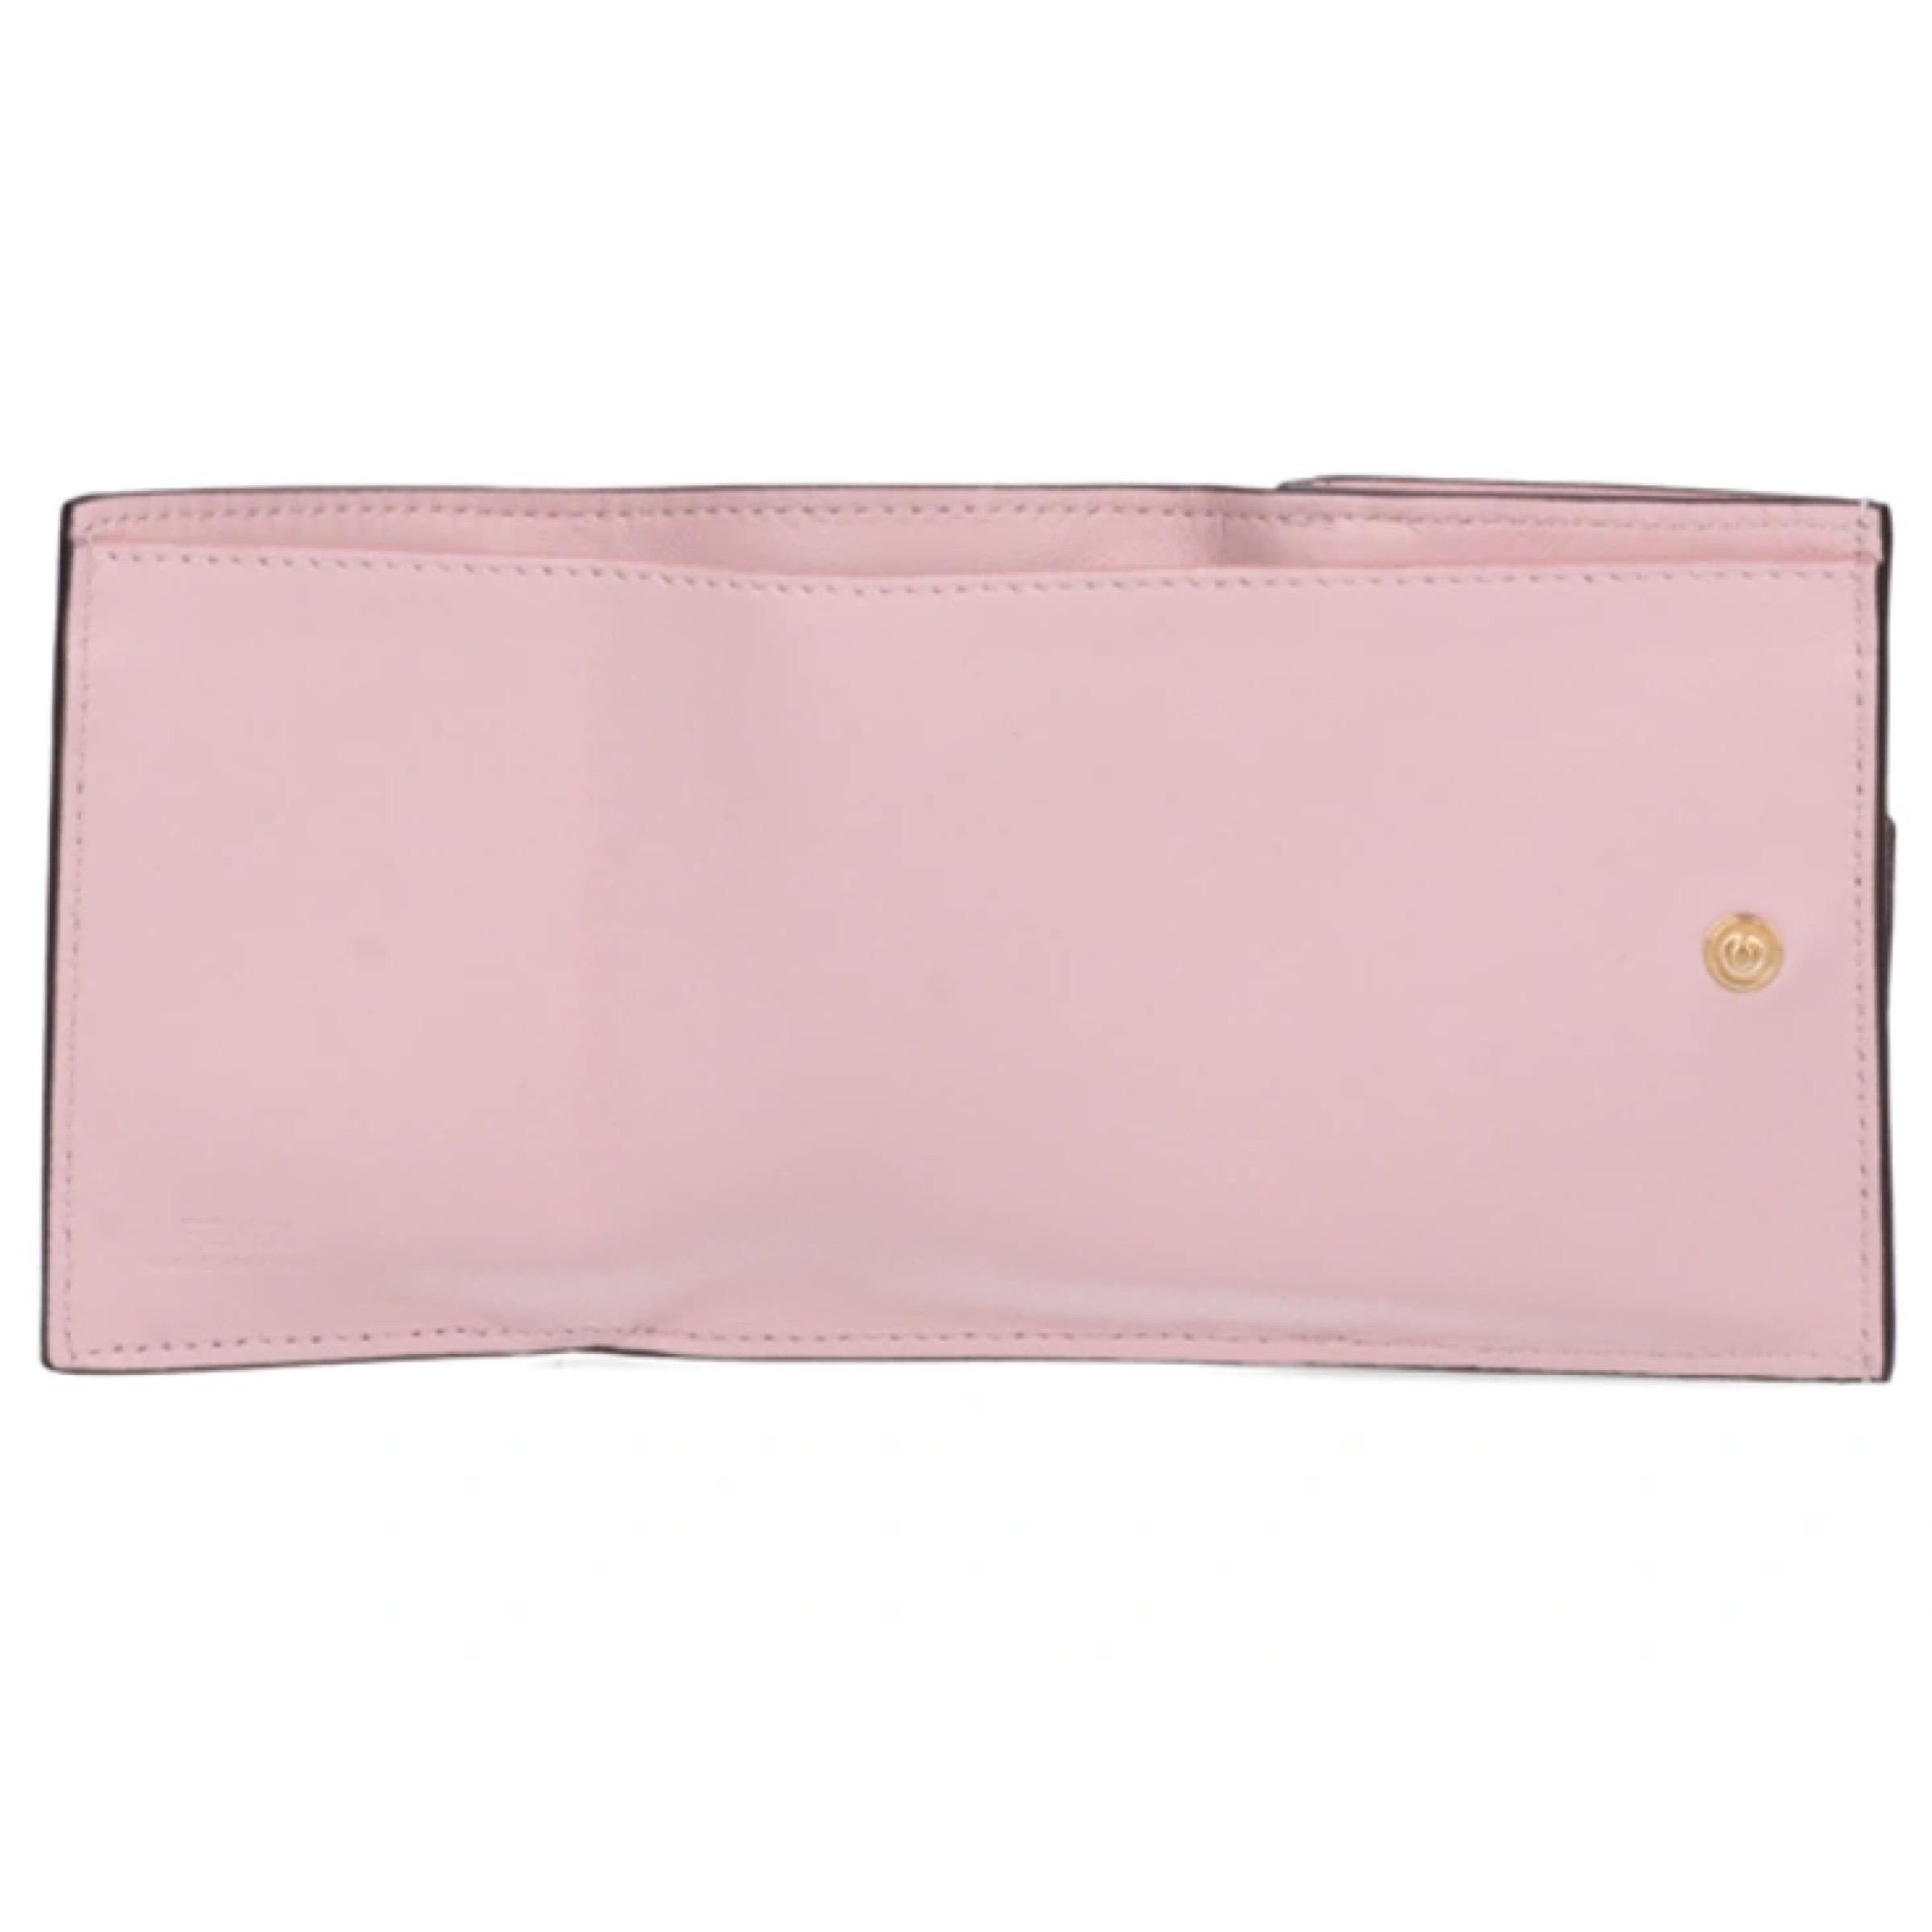 NEW Fendi Candy Pink Baguette Micro FF Monogram Leather Trifold Wallet For Sale 3